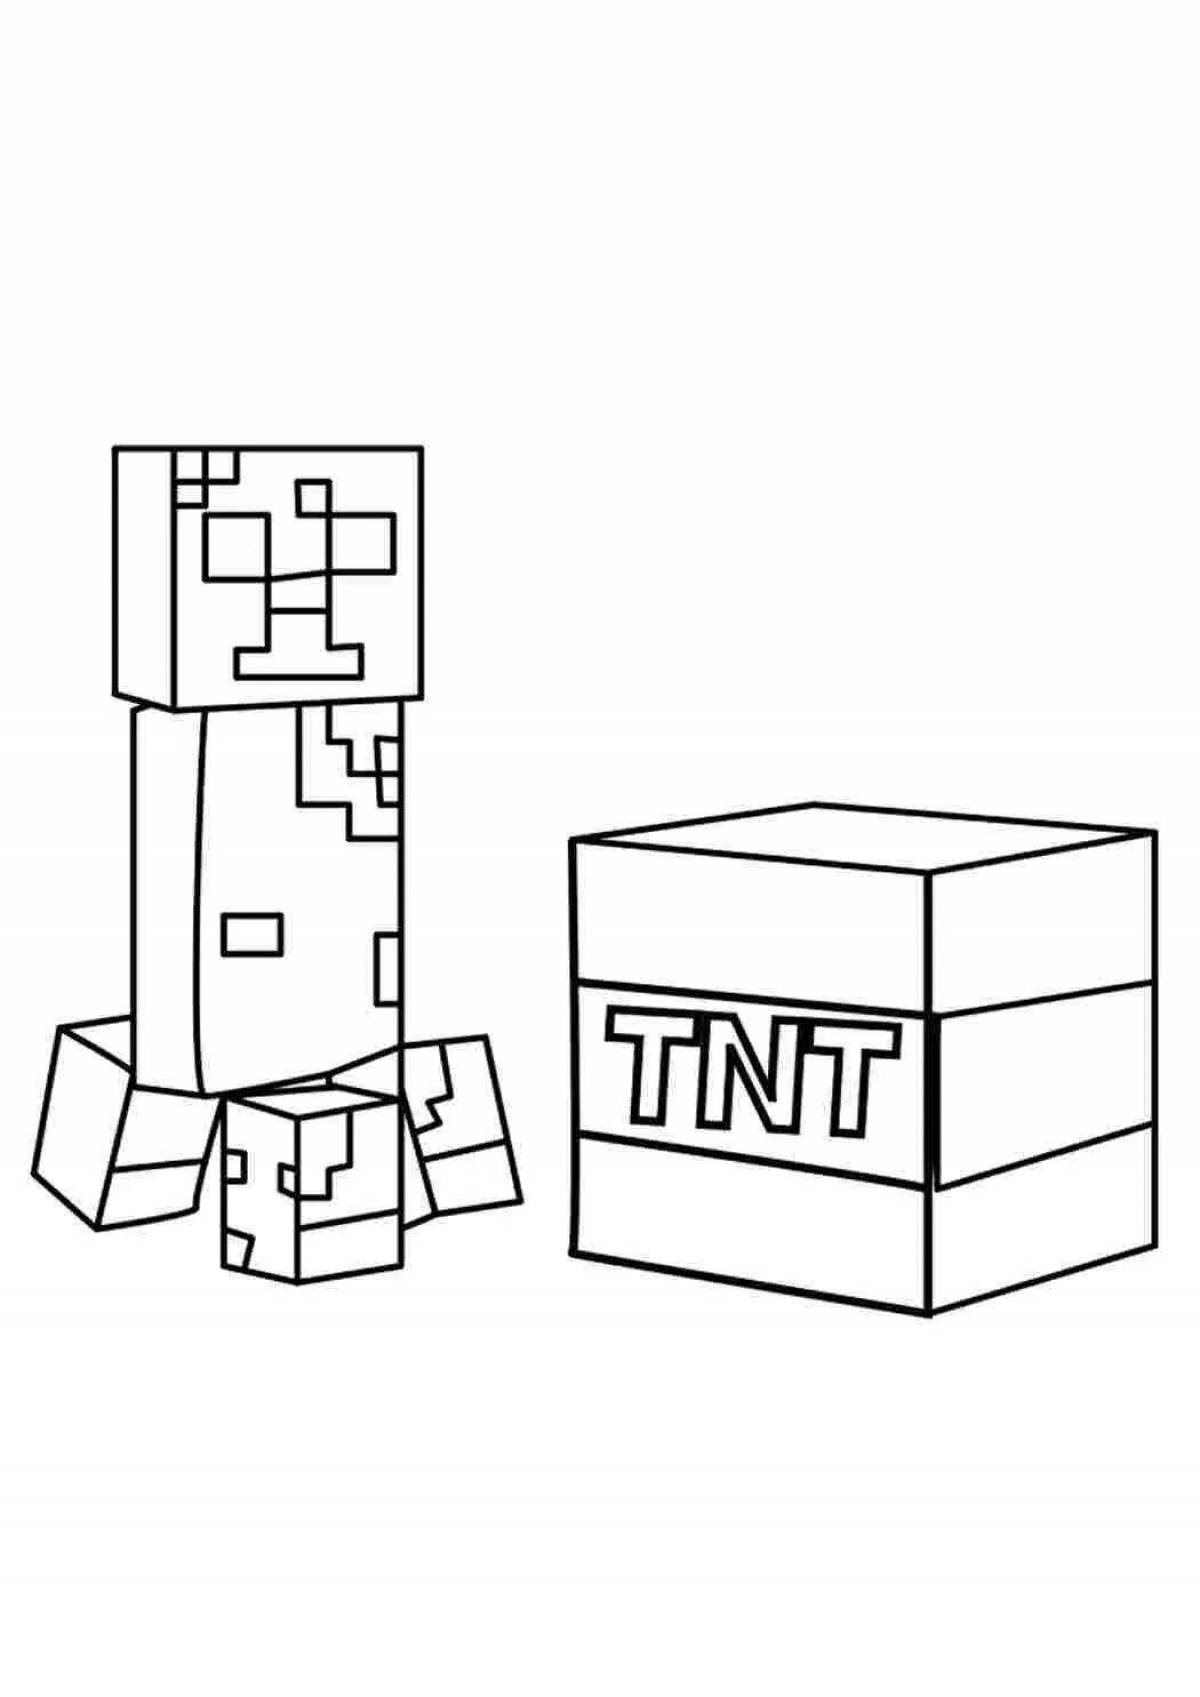 Playful minecraft block coloring page